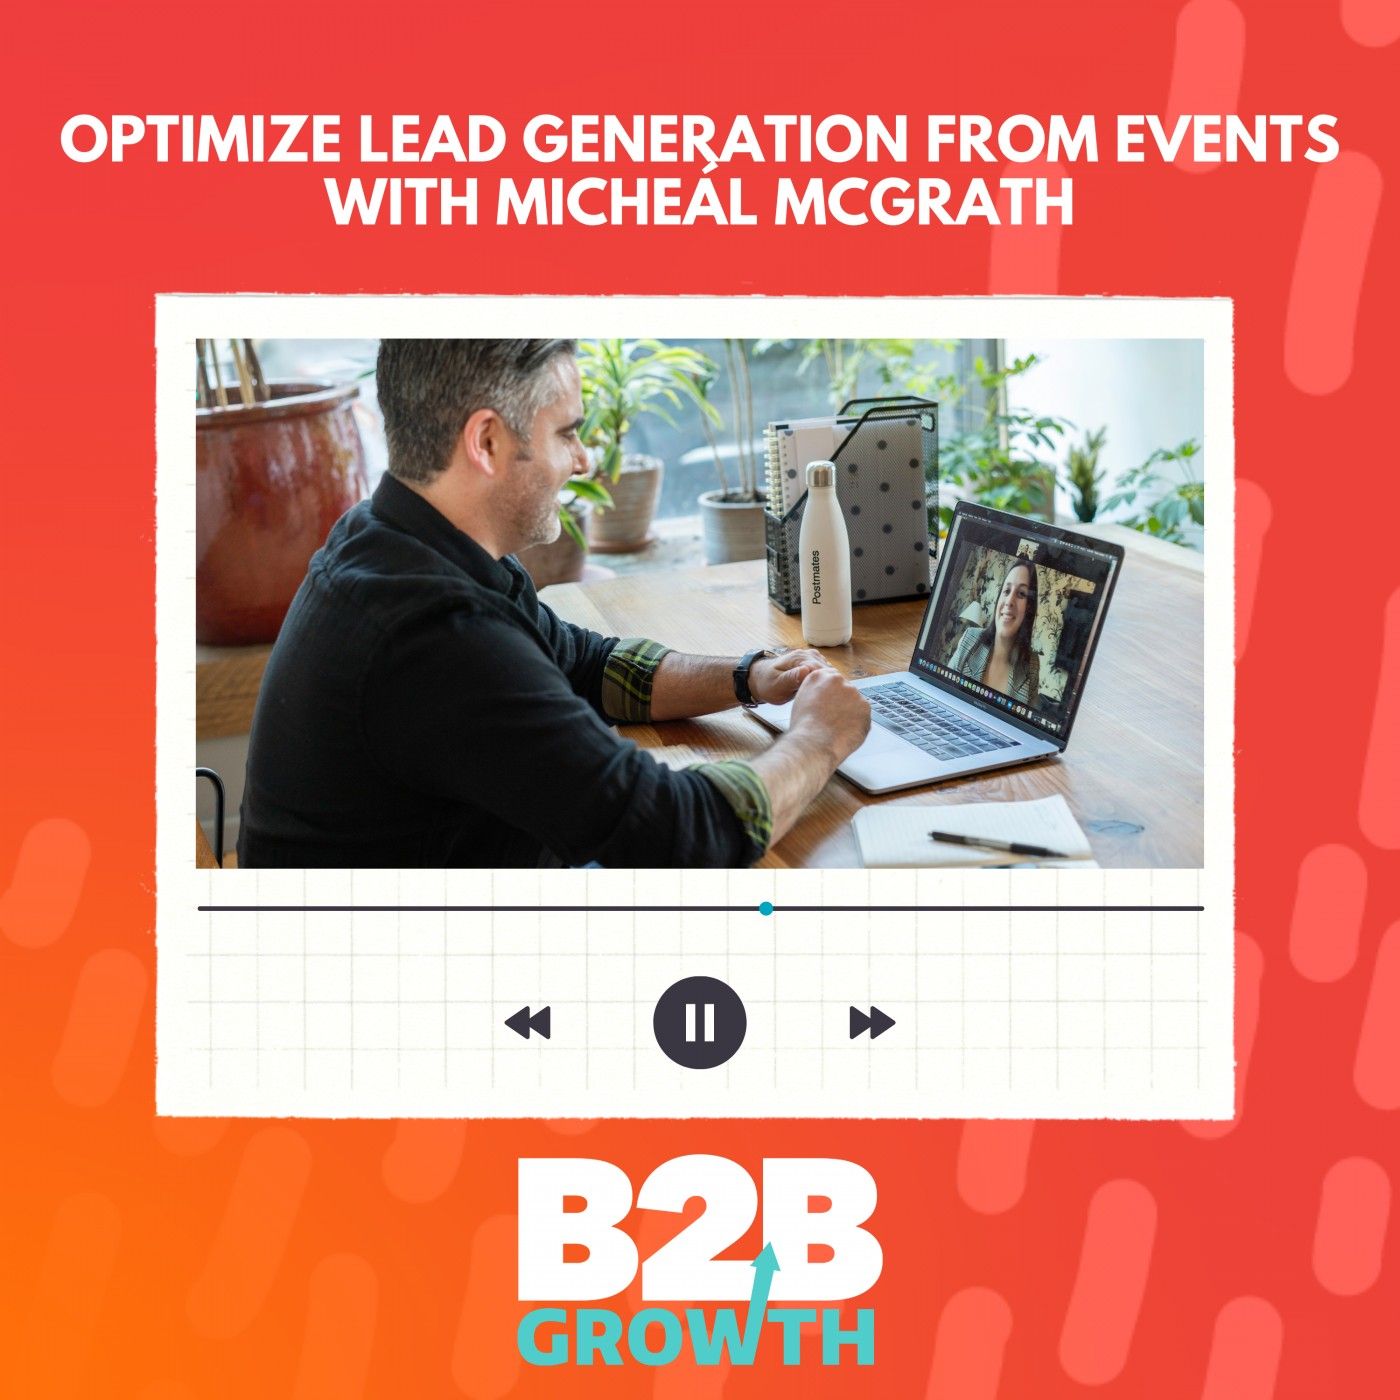 Optimize Lead Generation from Events, with Micheál McGrath